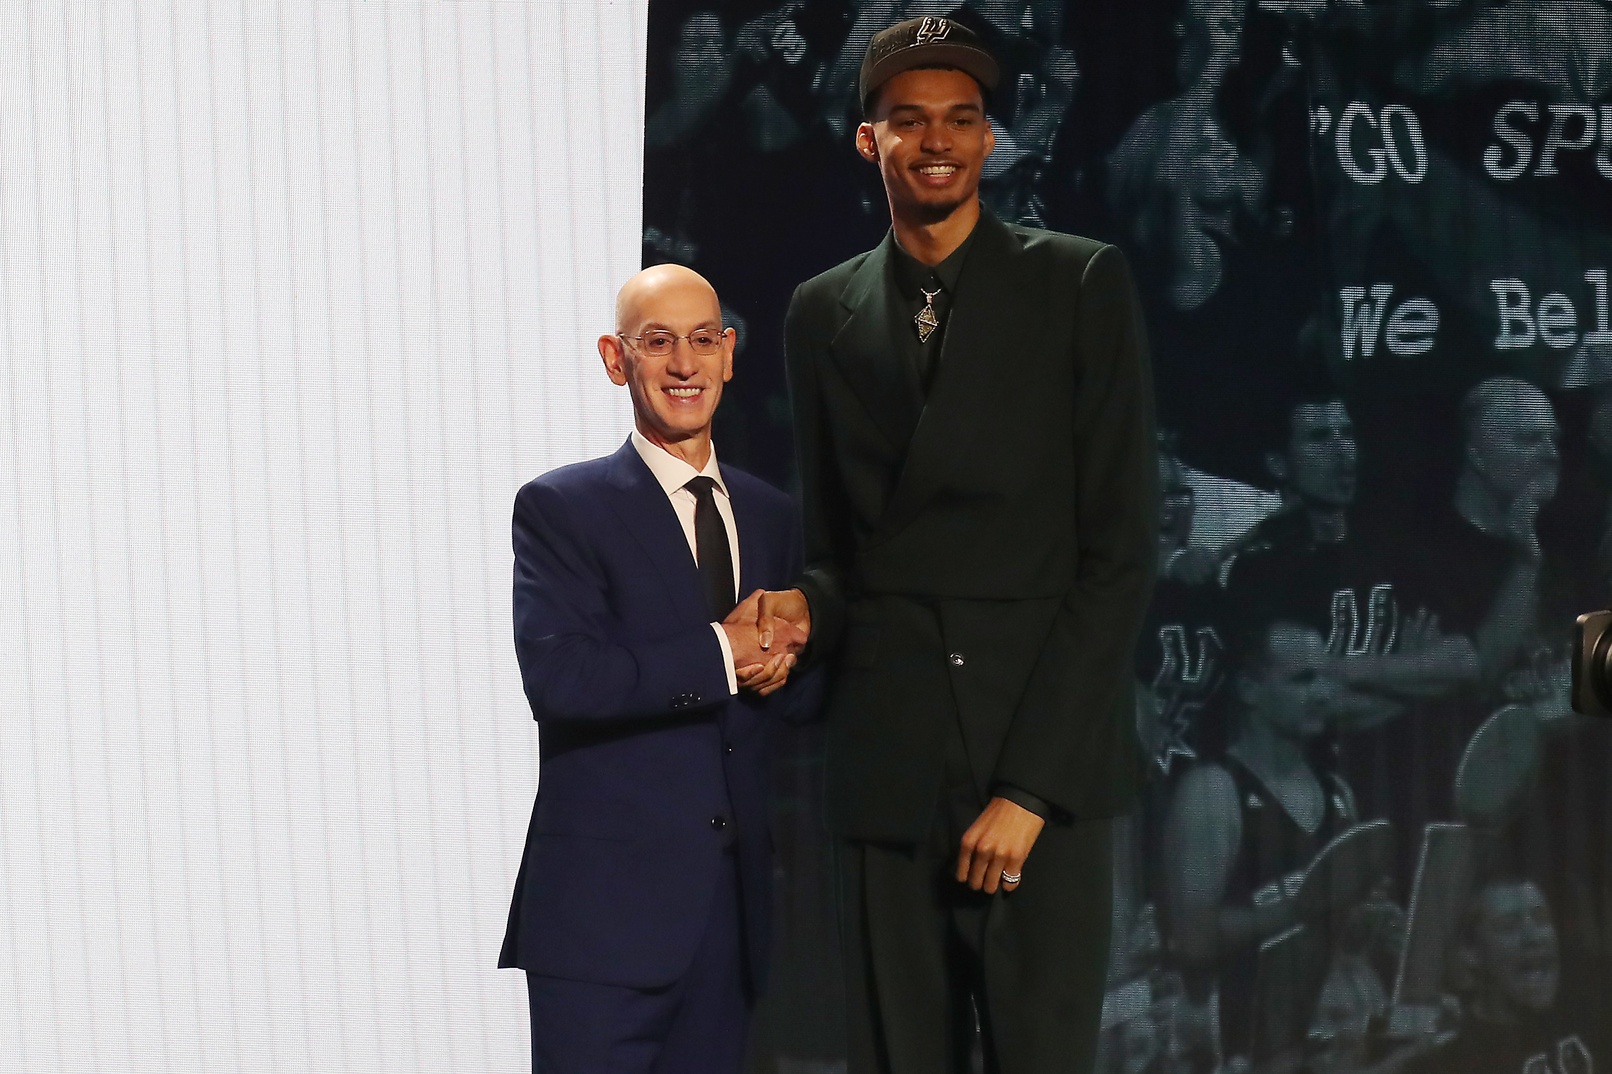 How Often Have Teams Gotten the First Pick Right in NBA Draft?